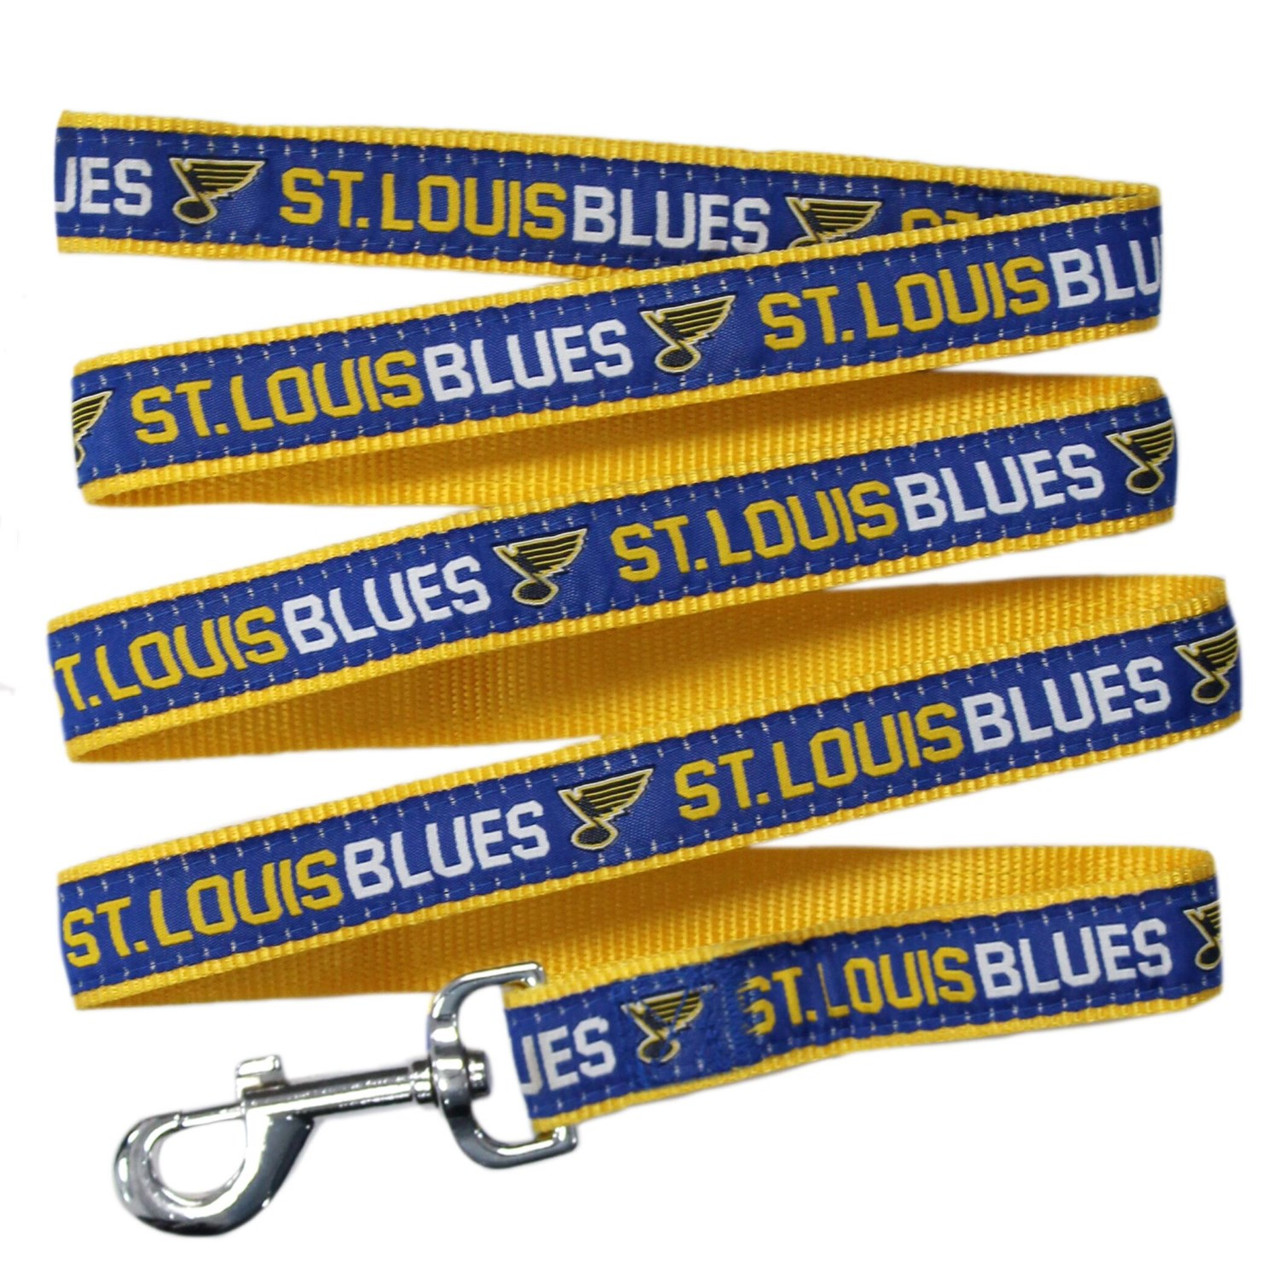  Pets First NHL Saint Louis Blues Collar for Dogs